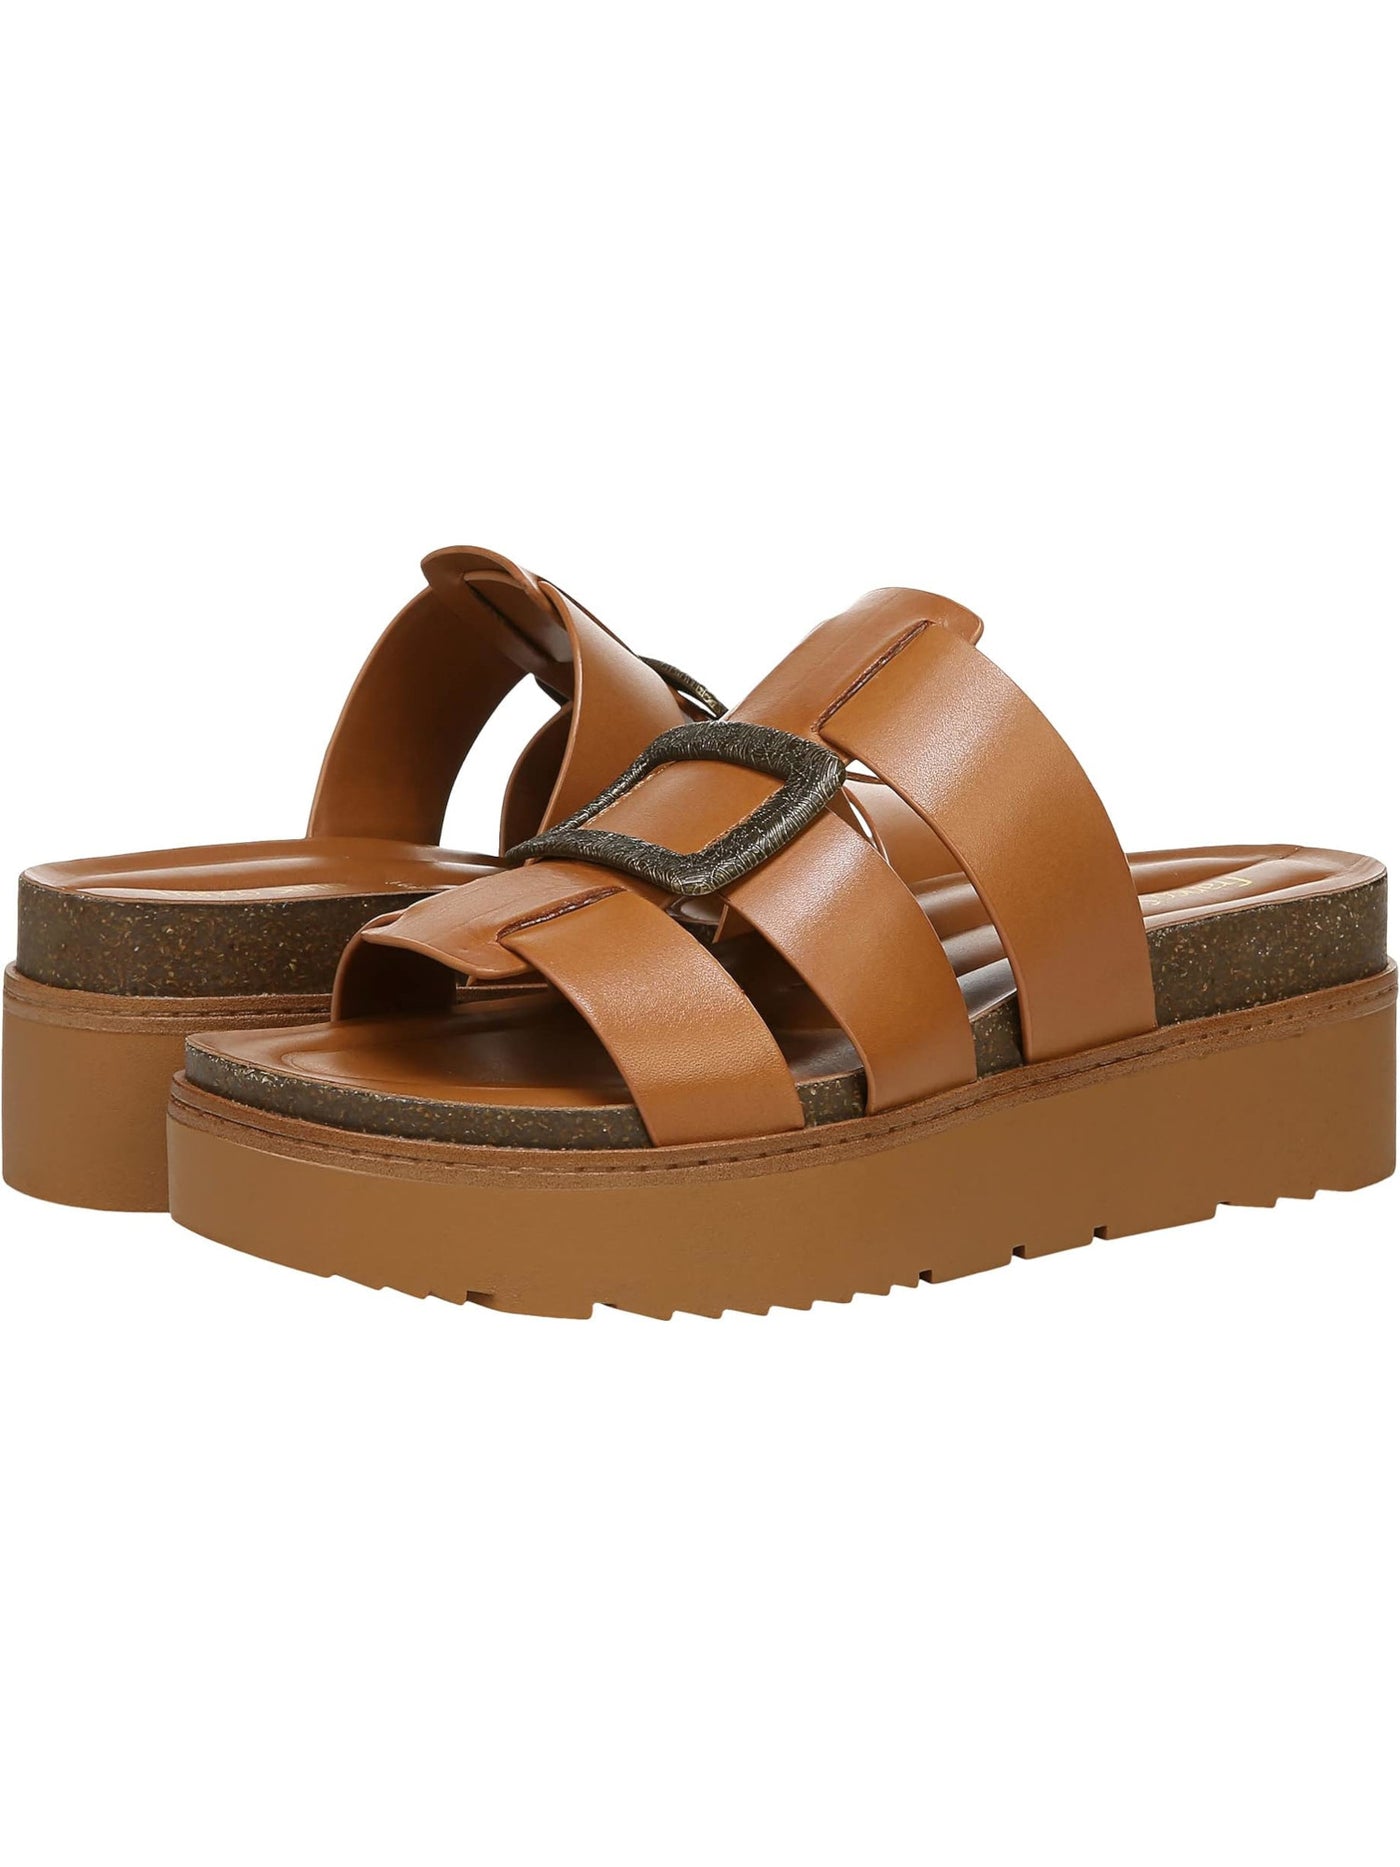 FRANCO SARTO Womens Brown Buckle Accent Comfort Patricia Round Toe Wedge Slip On Leather Slide Sandals 5.5 M